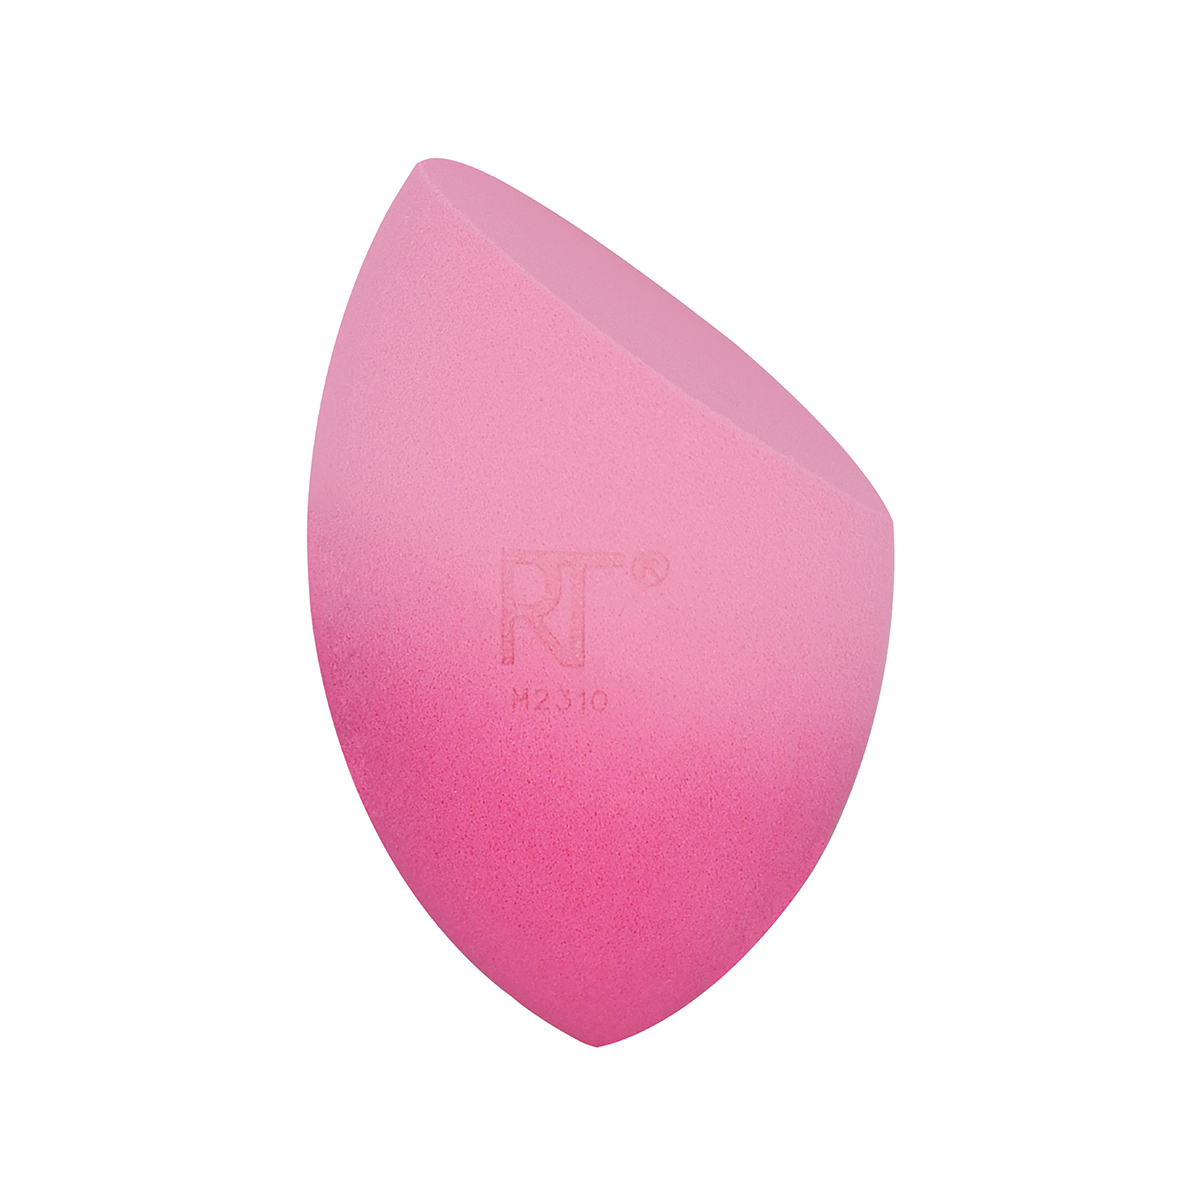 Спонж для макияжа Real Techniques Love IRL Limited edition 2 Miracle Complexion Sponge 